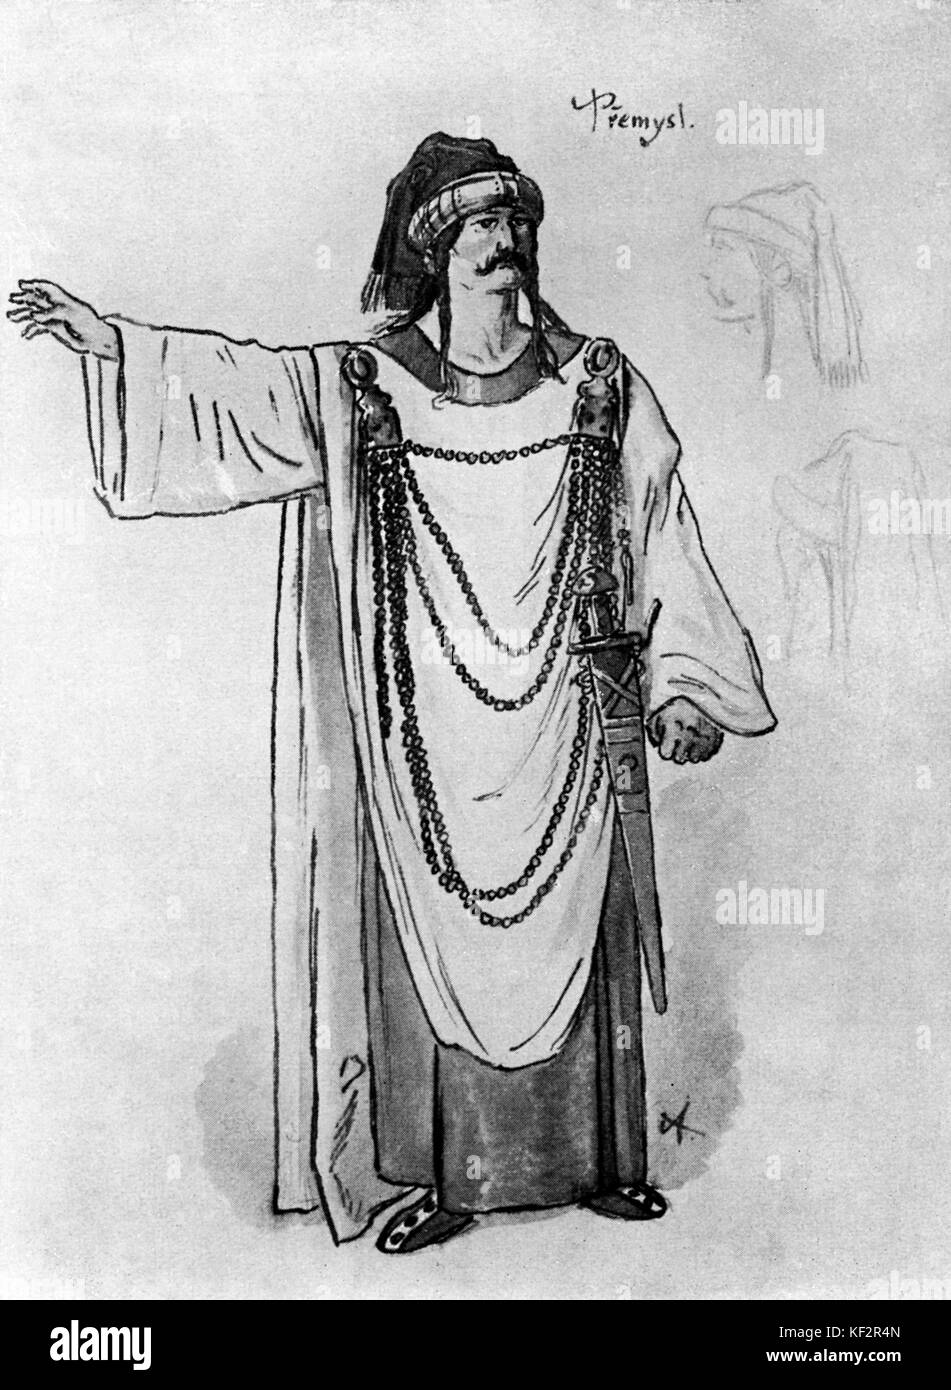 Costume design by Czech artist Mikolas Ales for the character Premysl from the opera Sarka by Zdenek Fibich. ZF: Czech composer, 21st December 1850 - 15th October 1900 Stock Photo